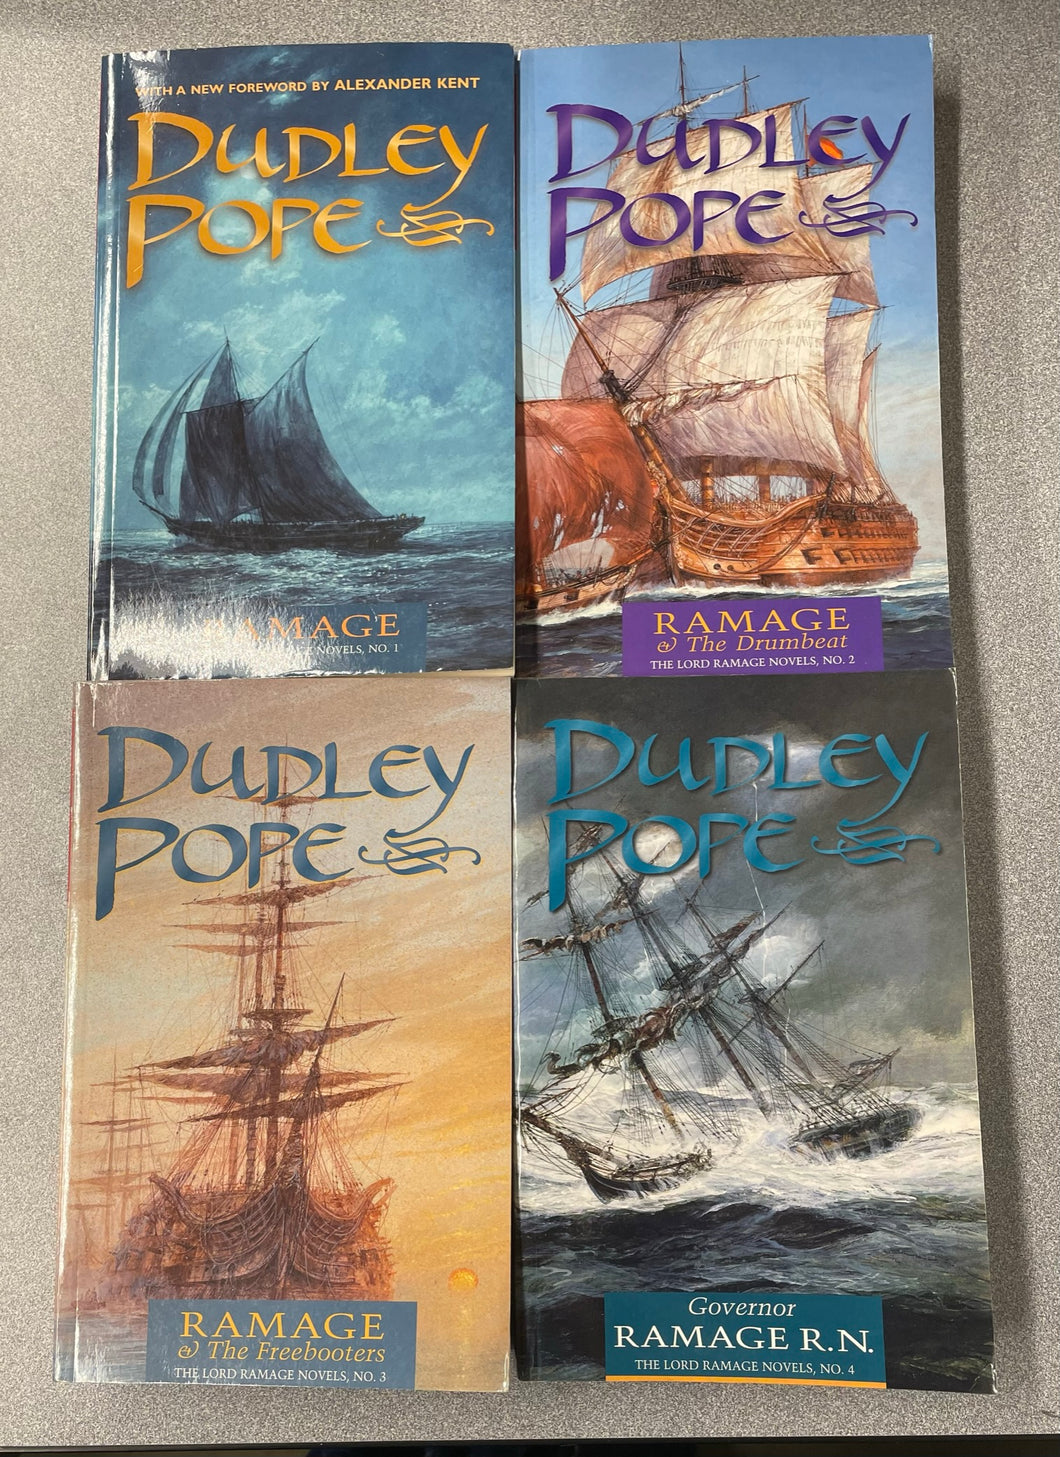 Pope, Dudley, Ramage and the Renegades: The Lord Ramage Novels, No. 12 [2001] AF 3/23